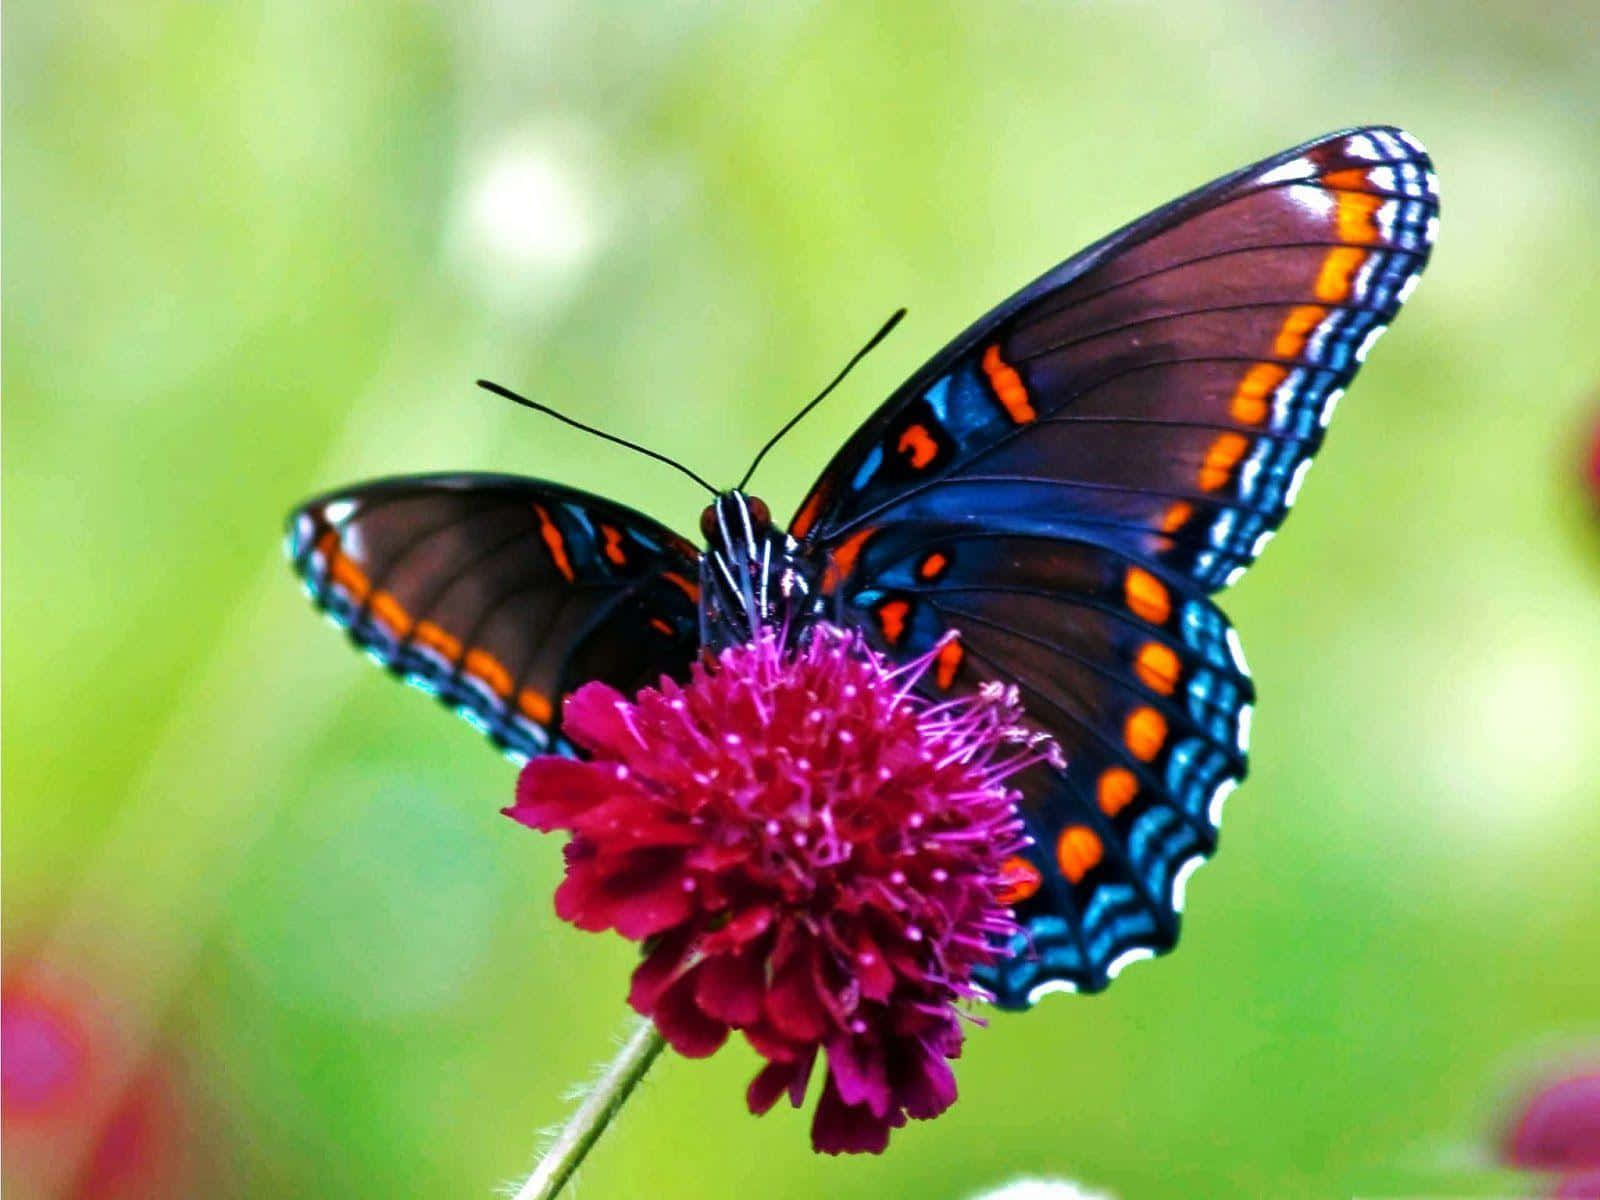 A Close-Up of a Real Butterfly